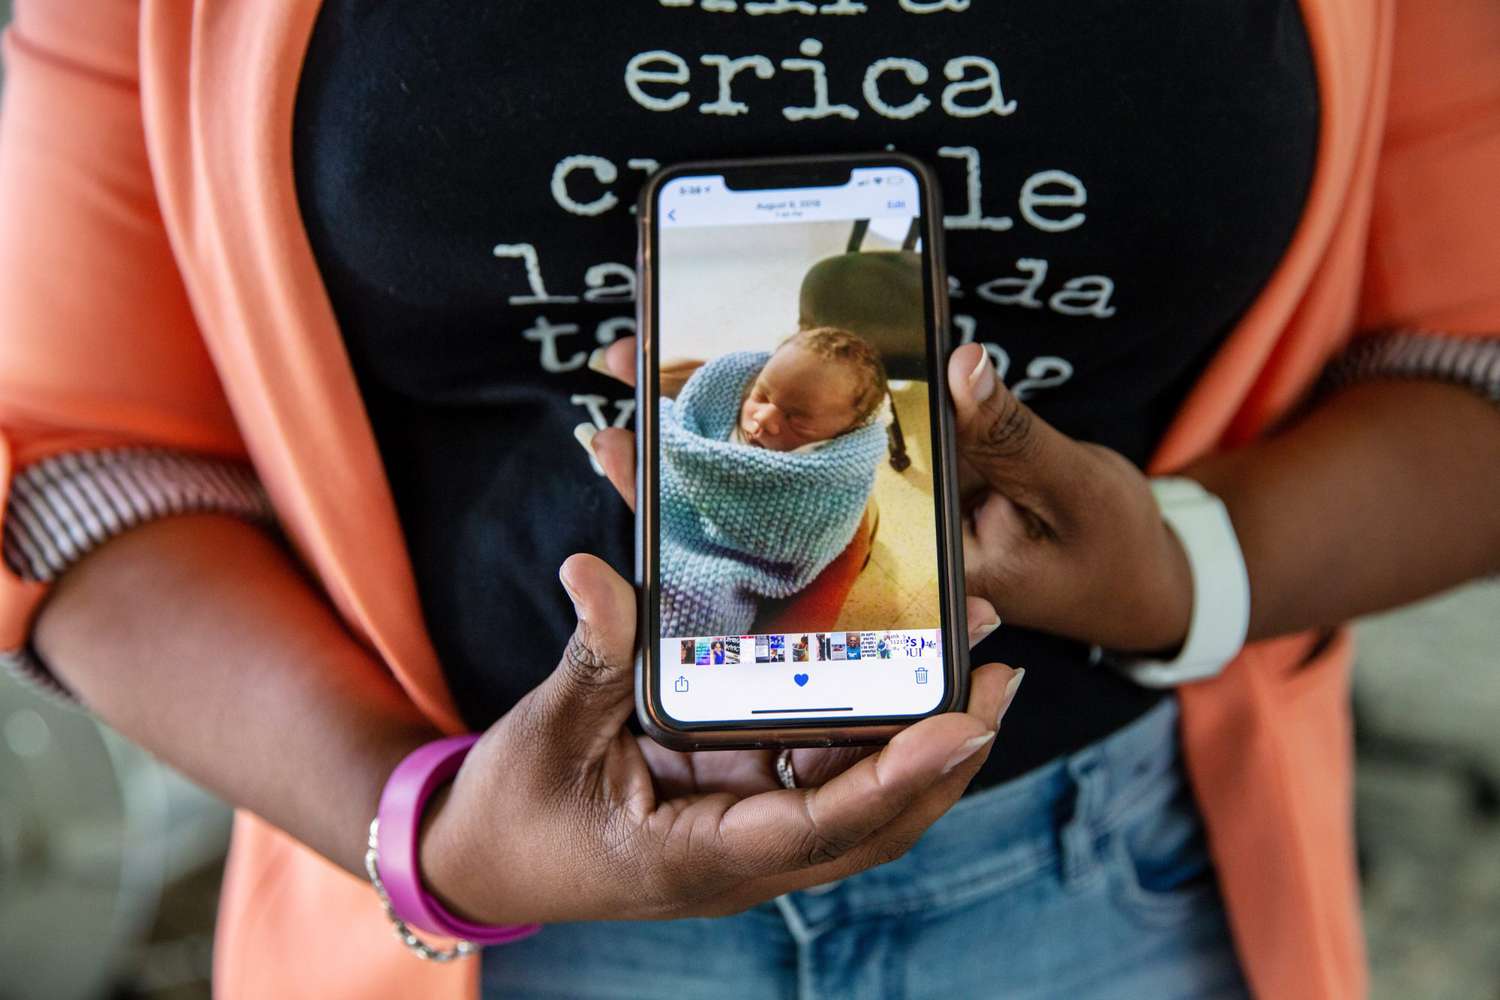 Tomeka Isaac shows off a picture of her son, Jace, on Monday, March 9, 2020 in her Denver, North Carolina home. In May 2018, Tomeka, who was due a month later, had to make an emergency visit to the hospital, where she and her husband, Brandon, discovered their son Jace was stillborn and that Tomeka was suffering from a previously undiagnosed, life-threatening condition called HELLP Syndrome. The couple later learned Jace's death and Tomeka's condition, which had her hospitalized for 45 days, were preventable.